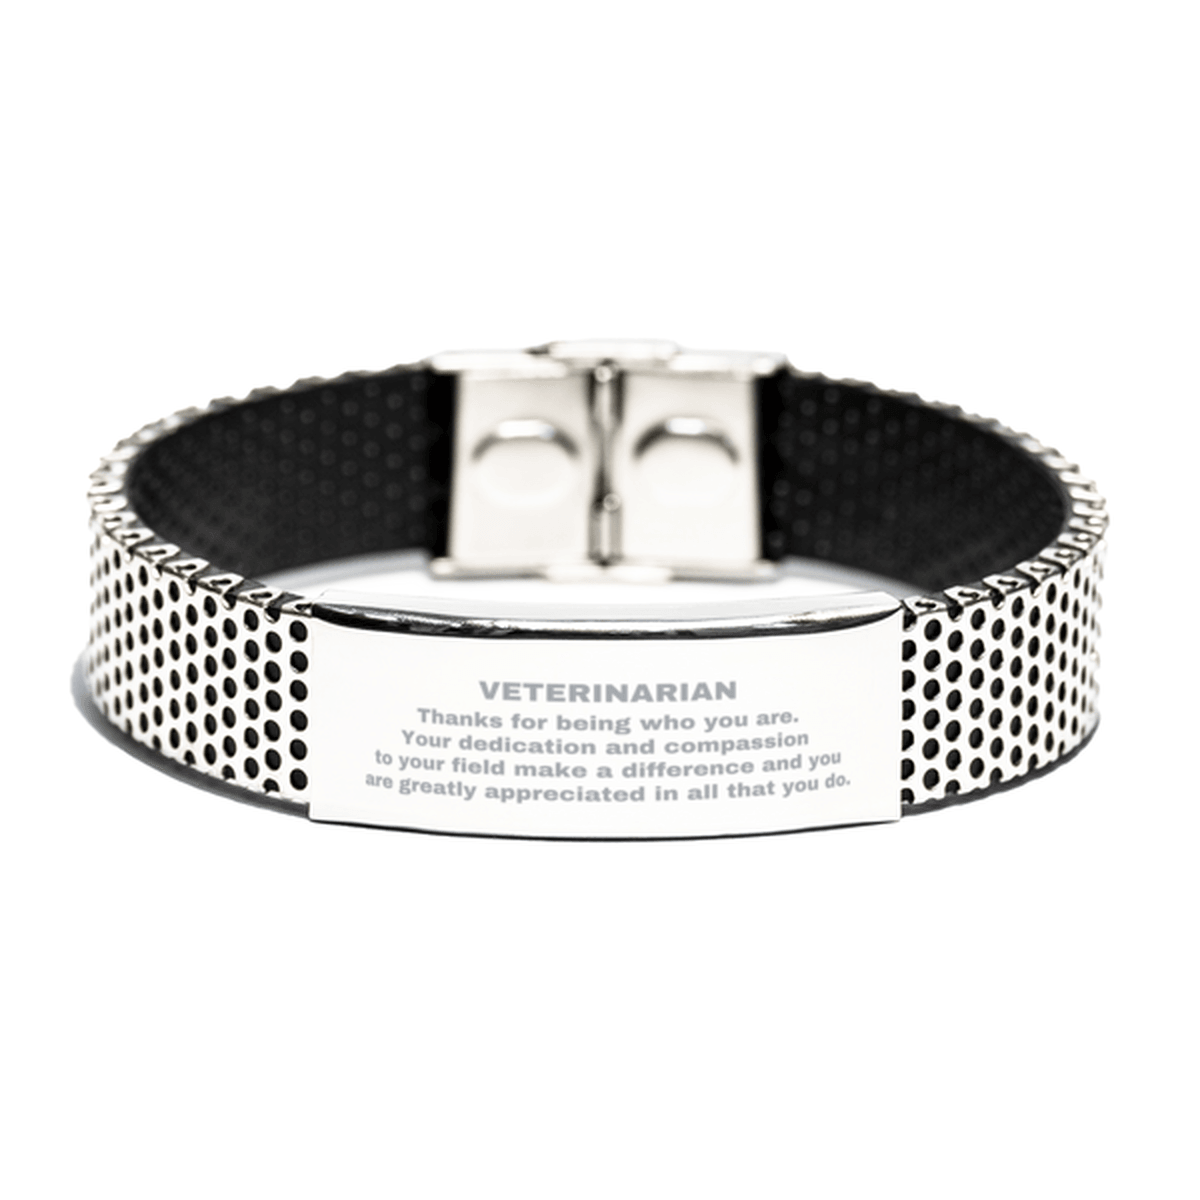 Veterinarian Silver Shark Mesh Stainless Steel Engraved Bracelet - Thanks for being who you are - Birthday Christmas Jewelry Gifts Coworkers Colleague Boss - Mallard Moon Gift Shop